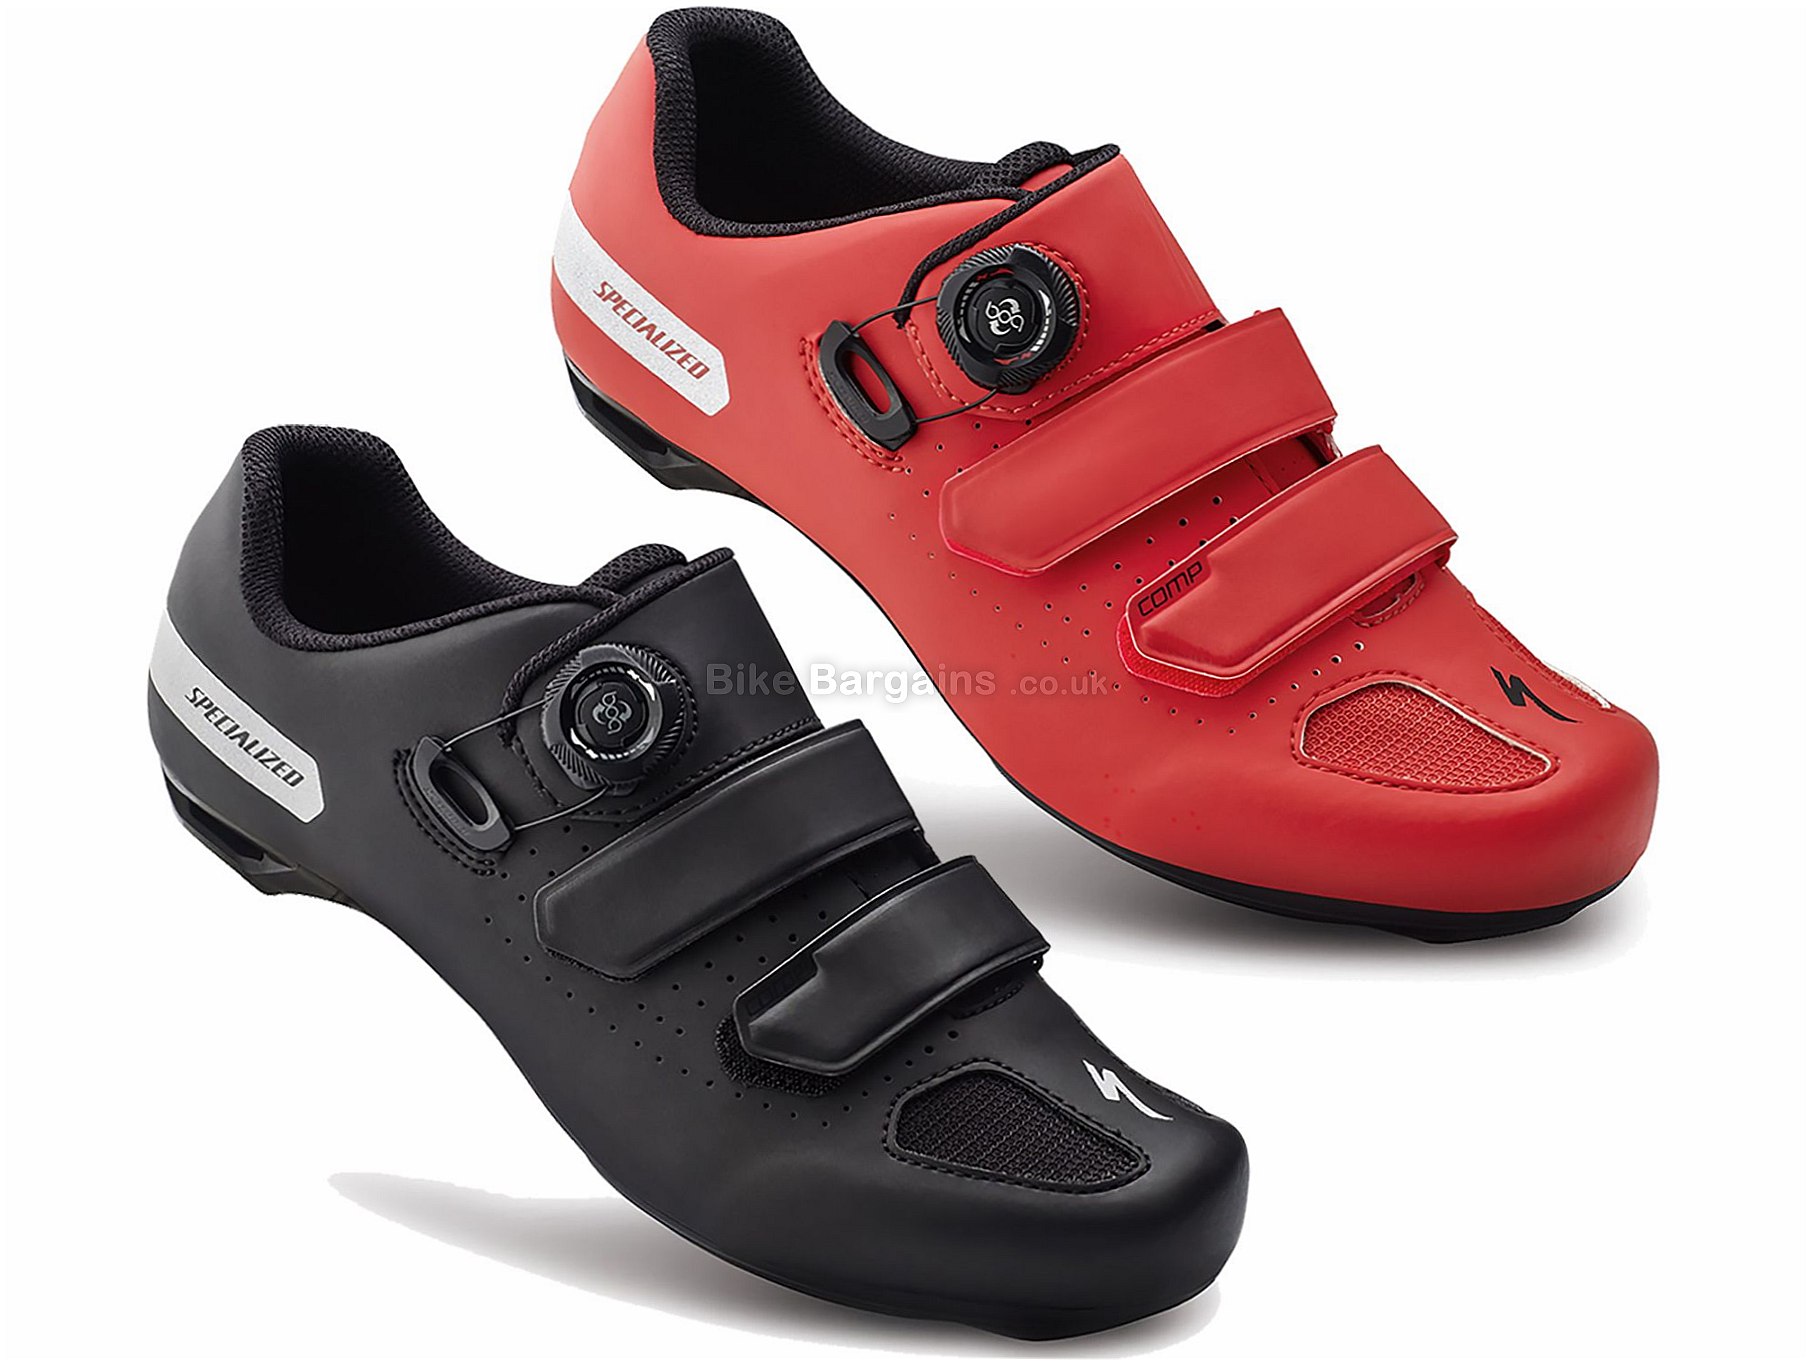 specialised road shoes uk